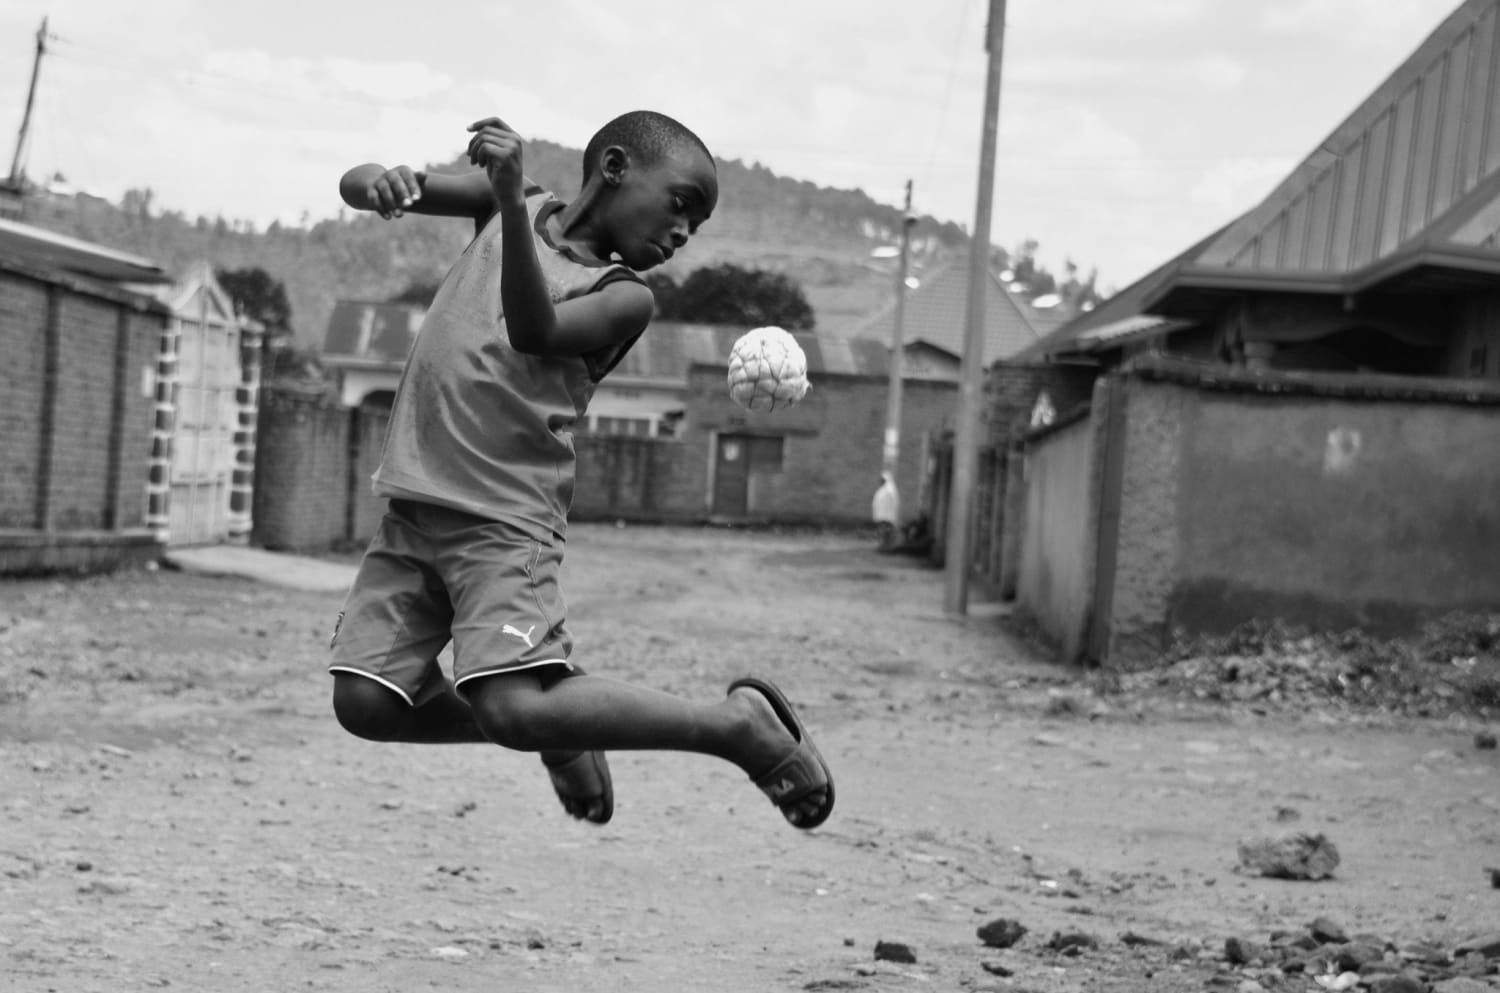 Kid playing with a local handmade football called 'karere' in the streets of Musanze, Rwanda